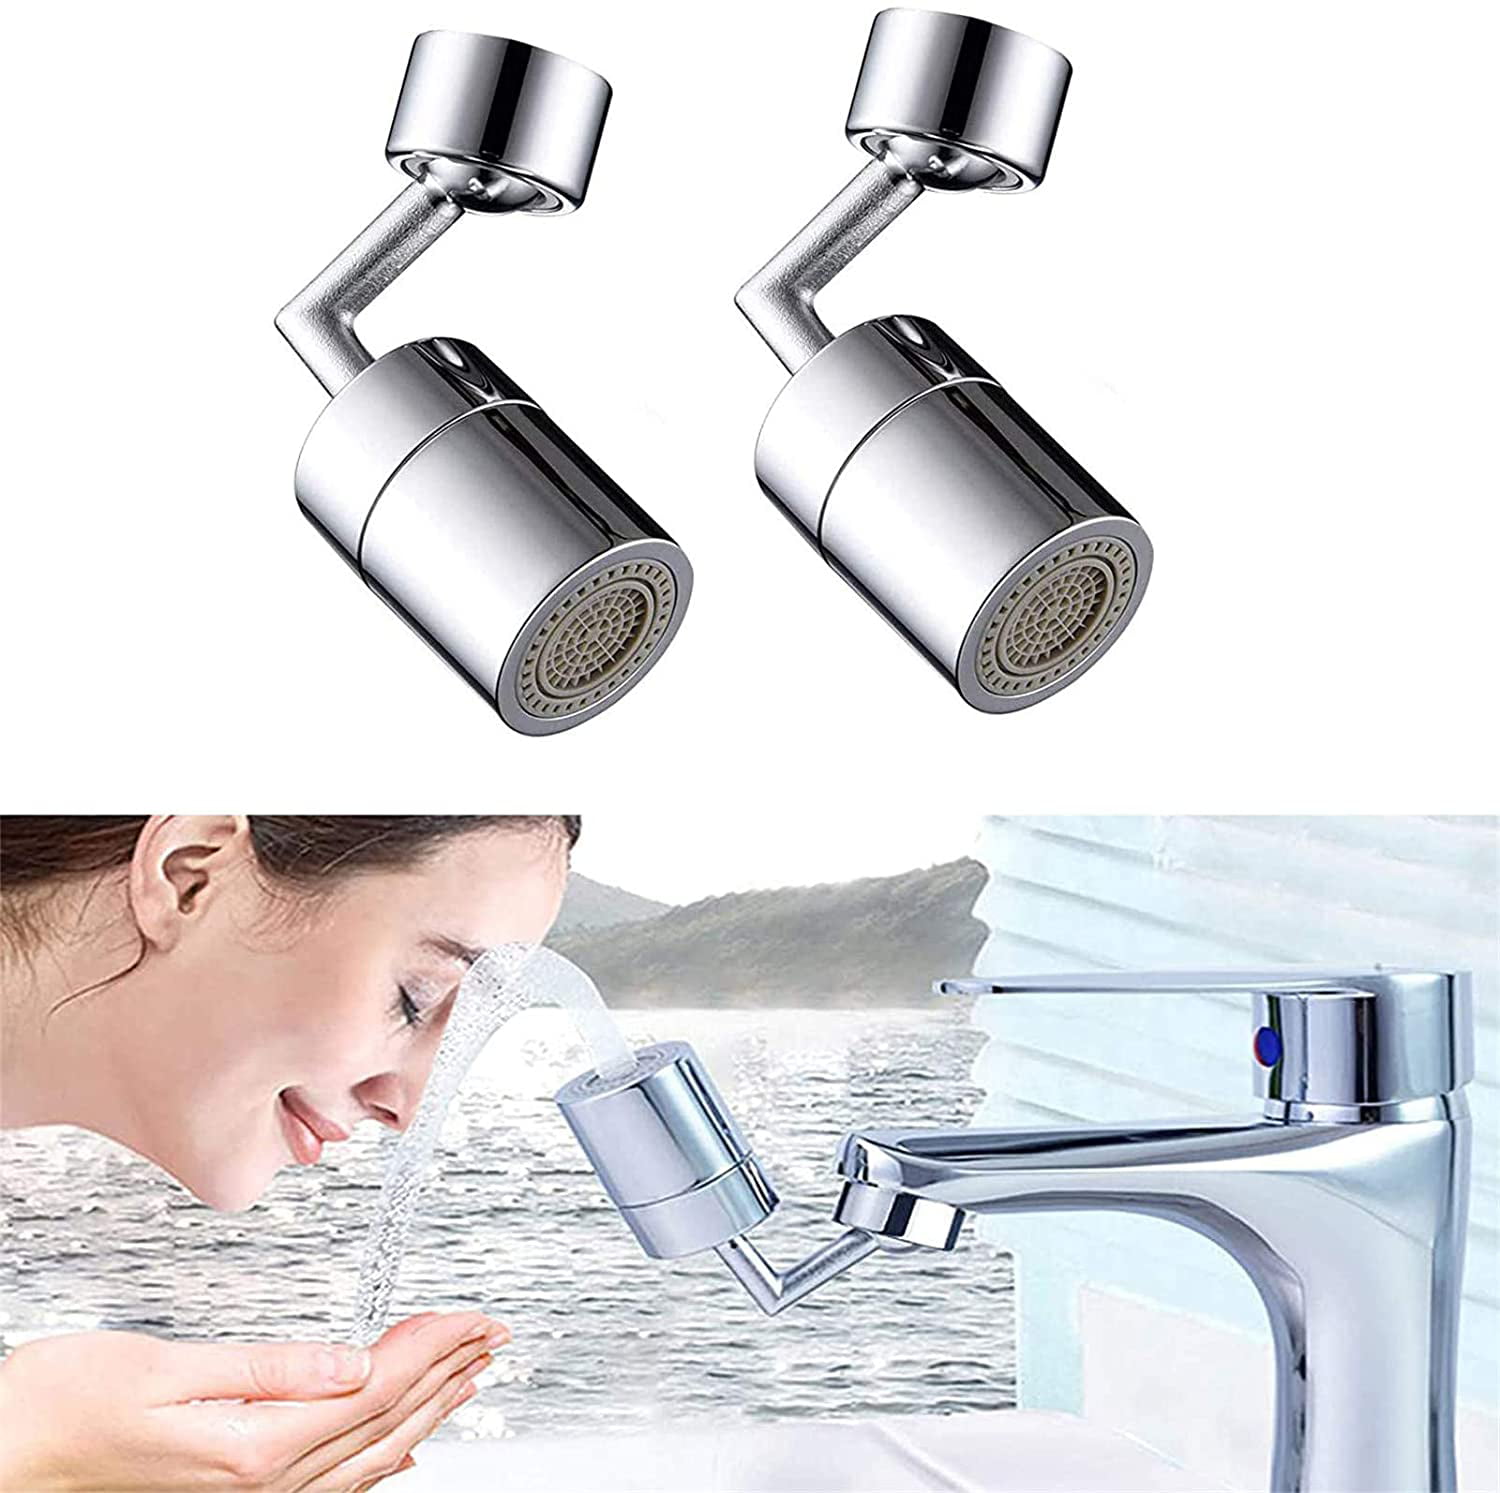 Brass Nozzle Filter for Kitchen Bathroom Balcony 360° Rotatable Faucet Sprayer Head with Dual Function Water Outlet Limentar 2Pcs Universal Splash Filter Faucet 4-Layer Net Filter 